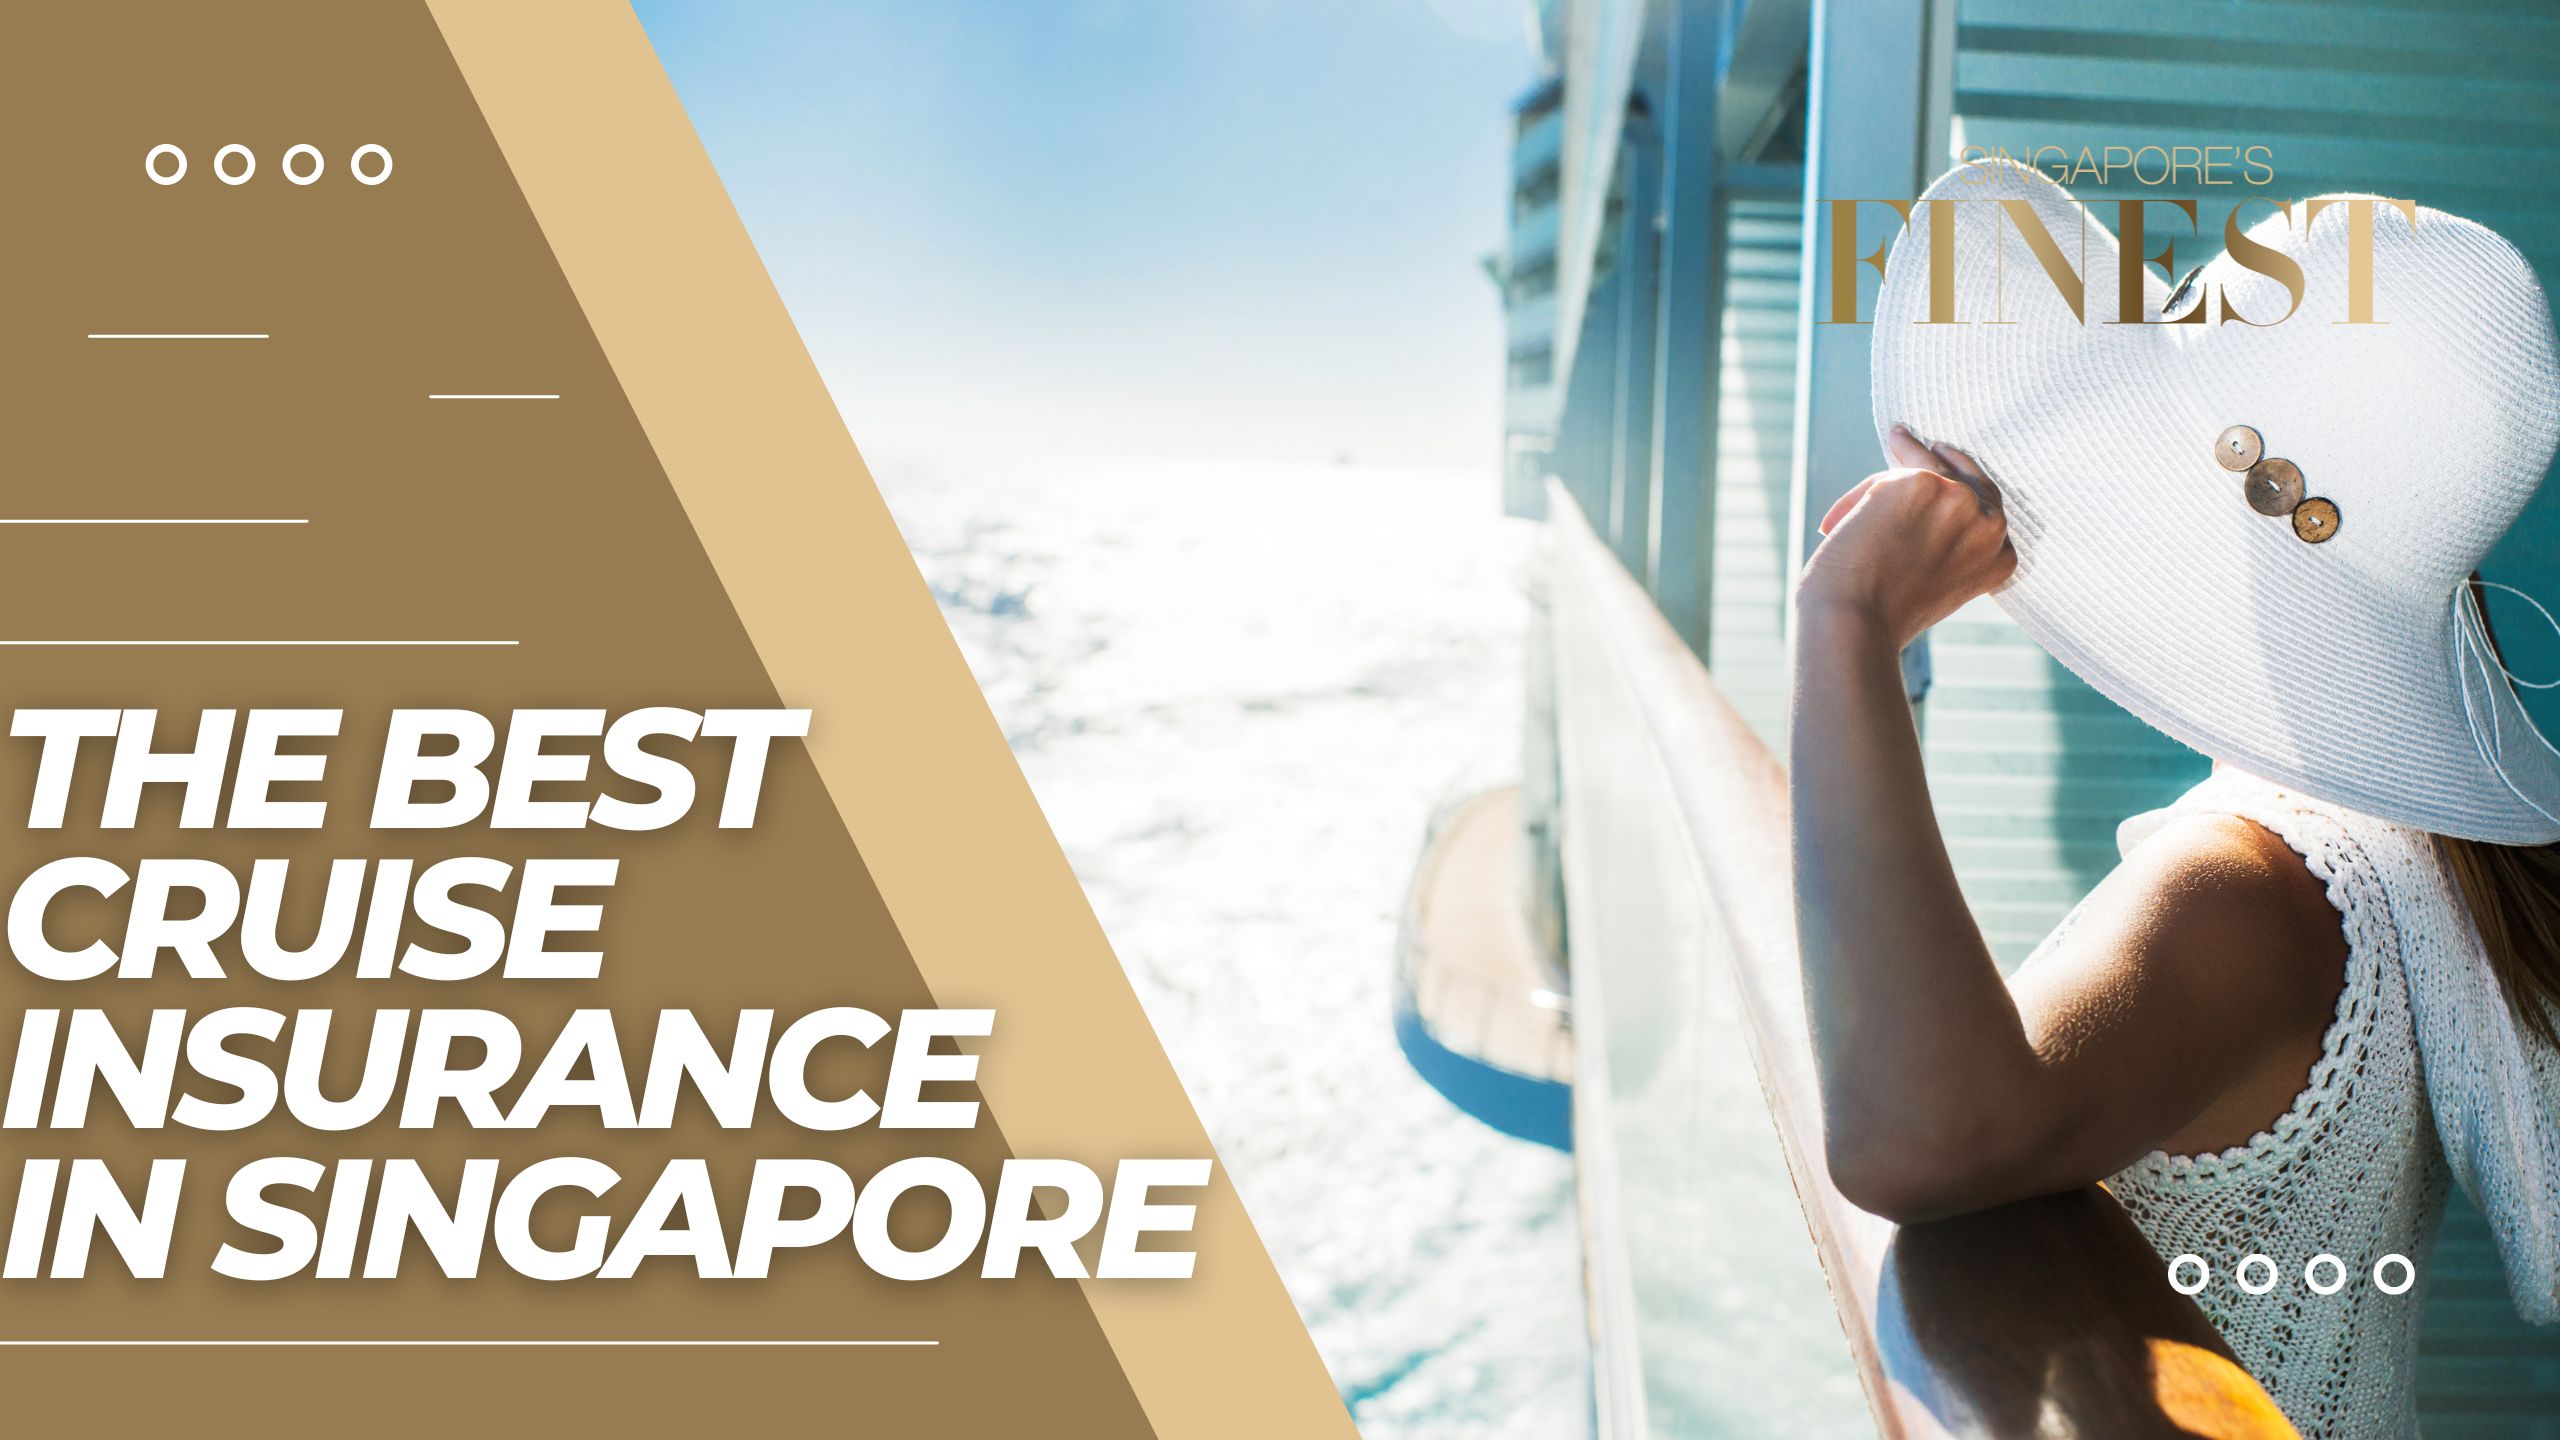 The Finest Cruise Insurance in Singapore